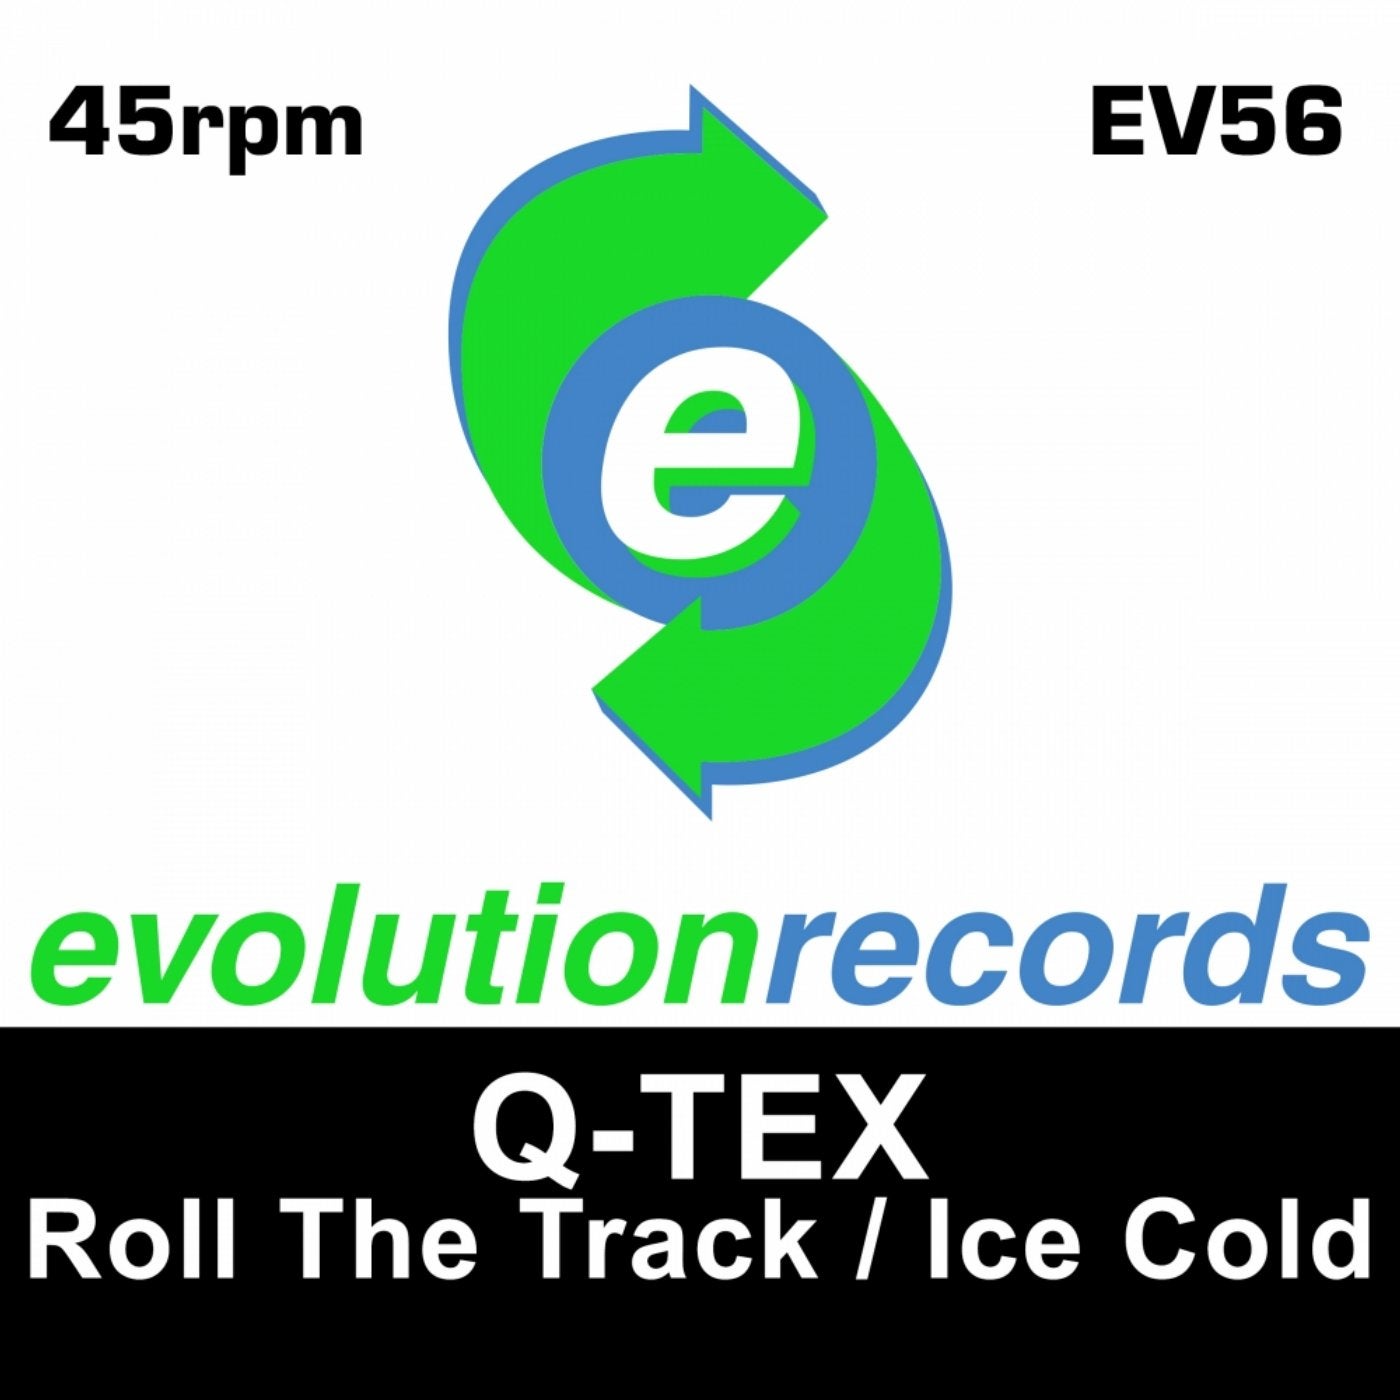 Roll The Track / Ice Cold